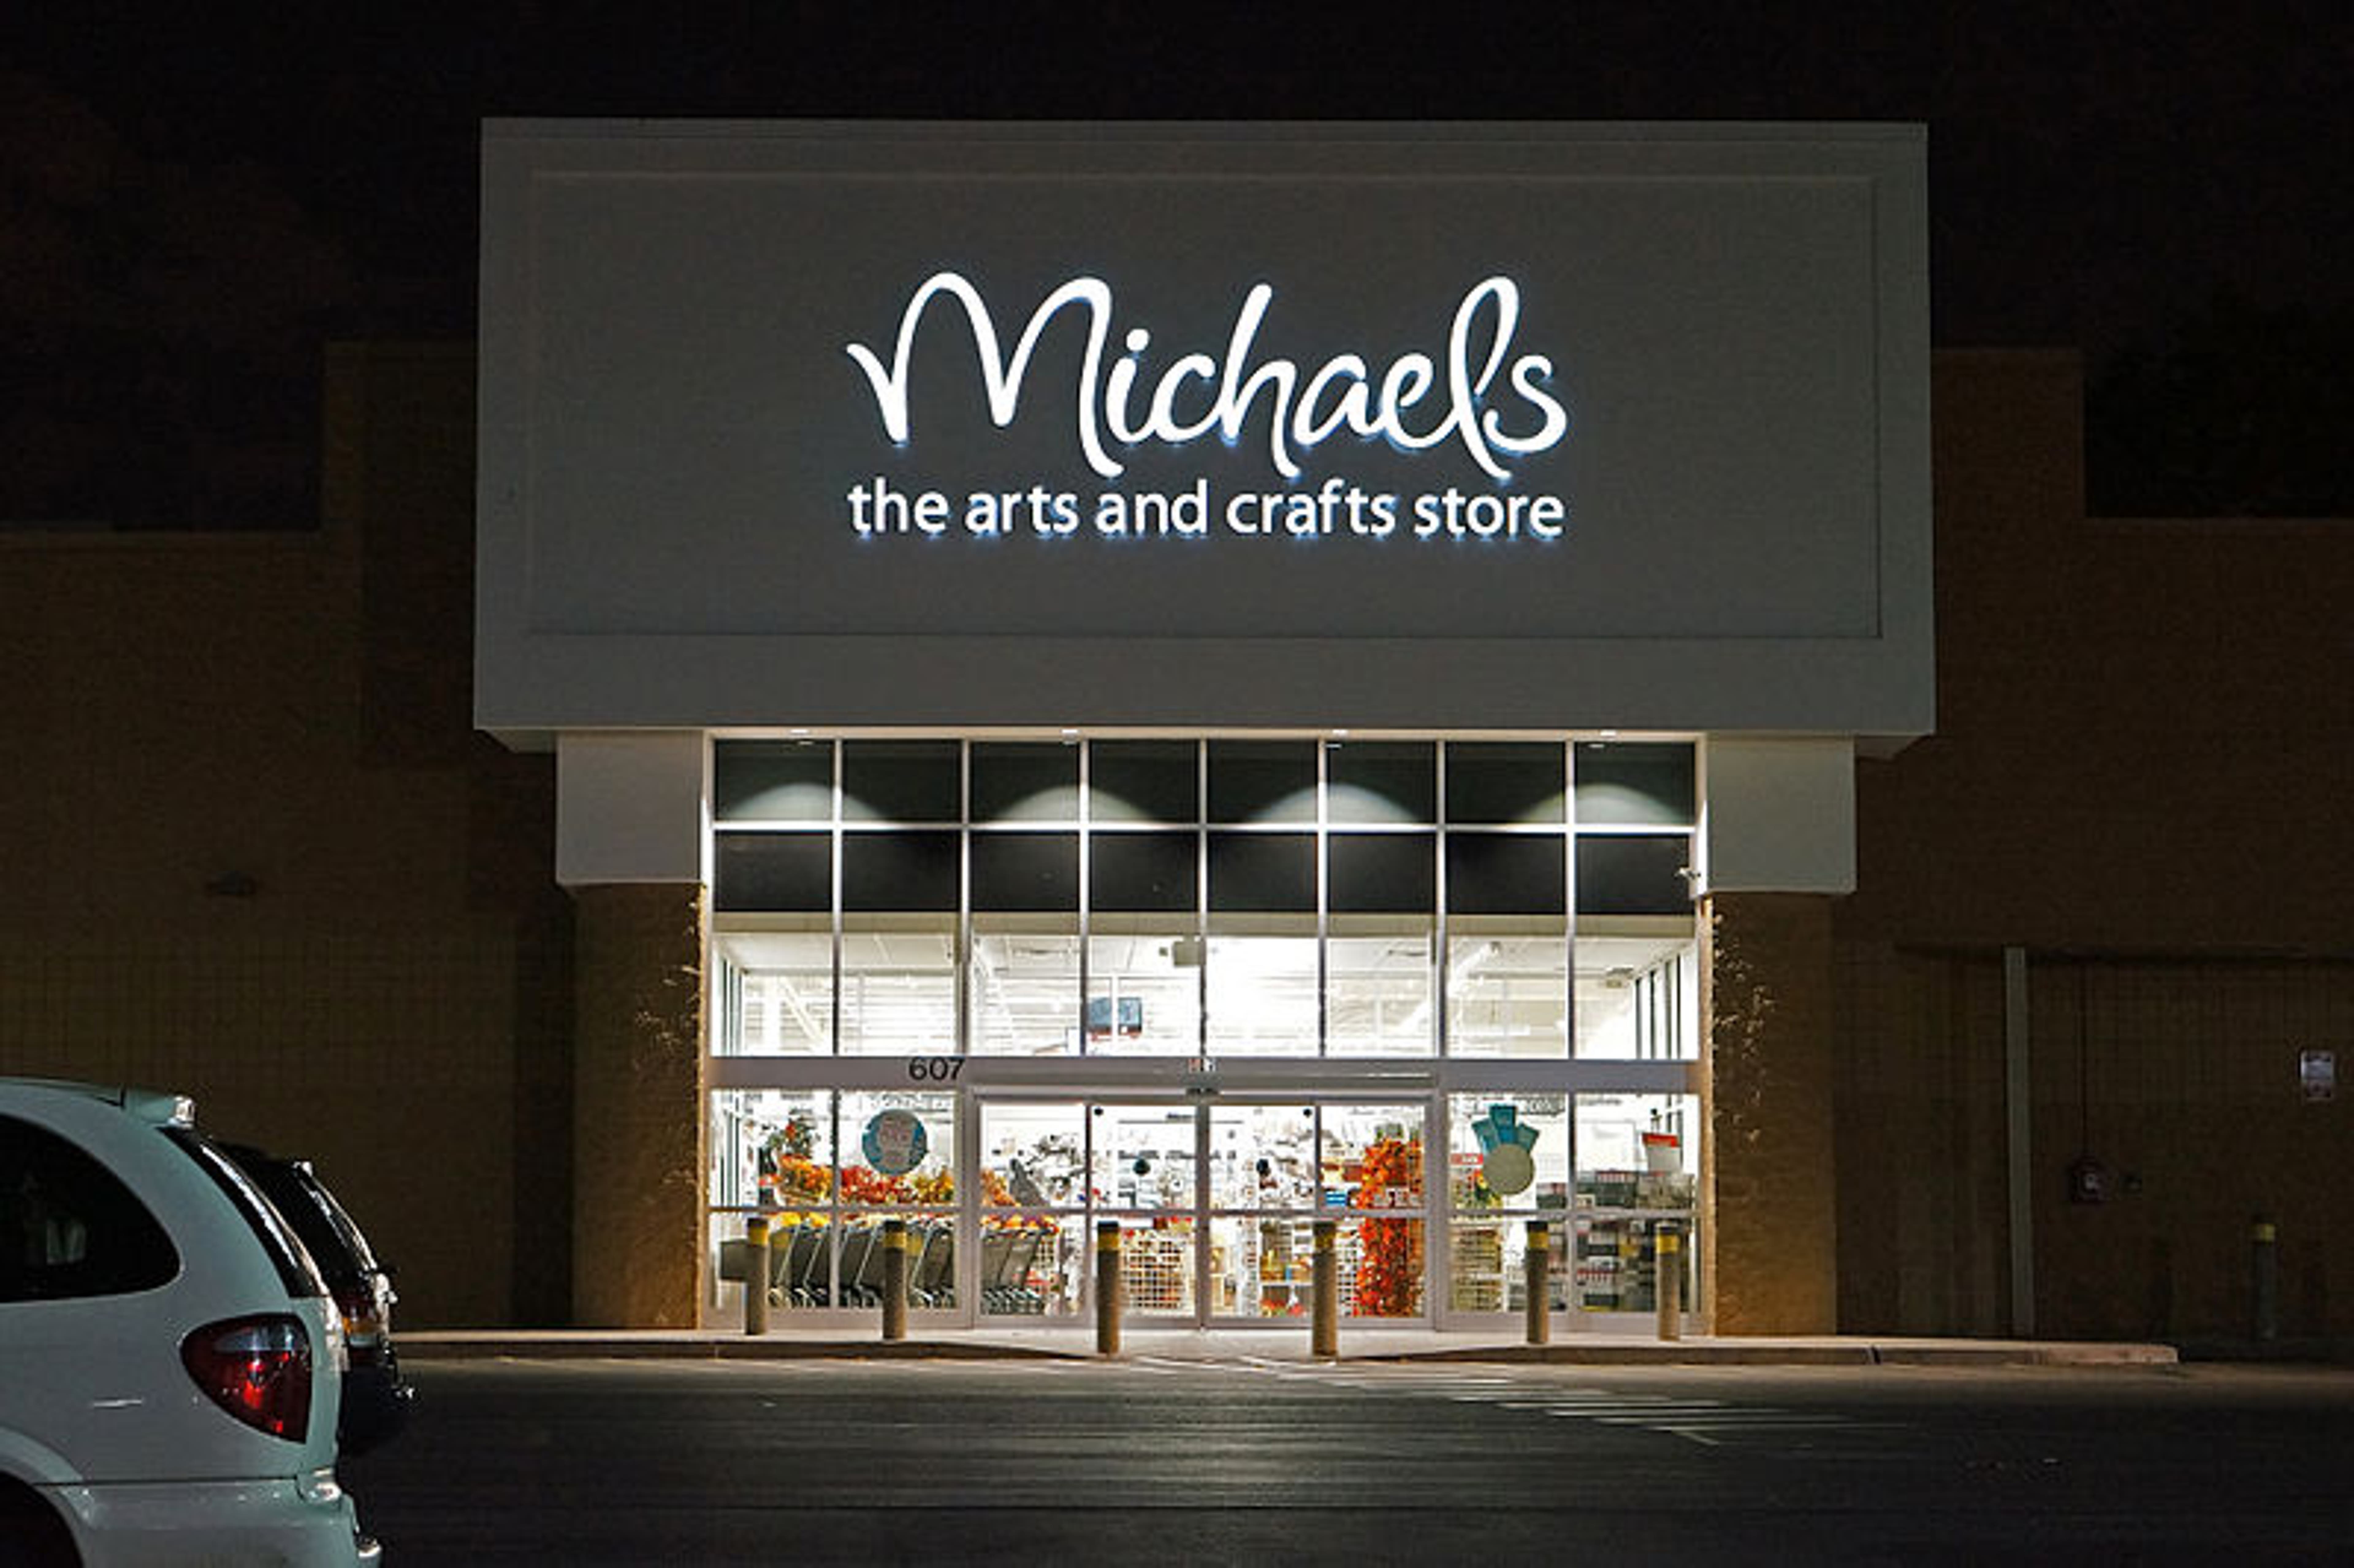 Michaels Acquired By Apollo Global Management For $3.3B